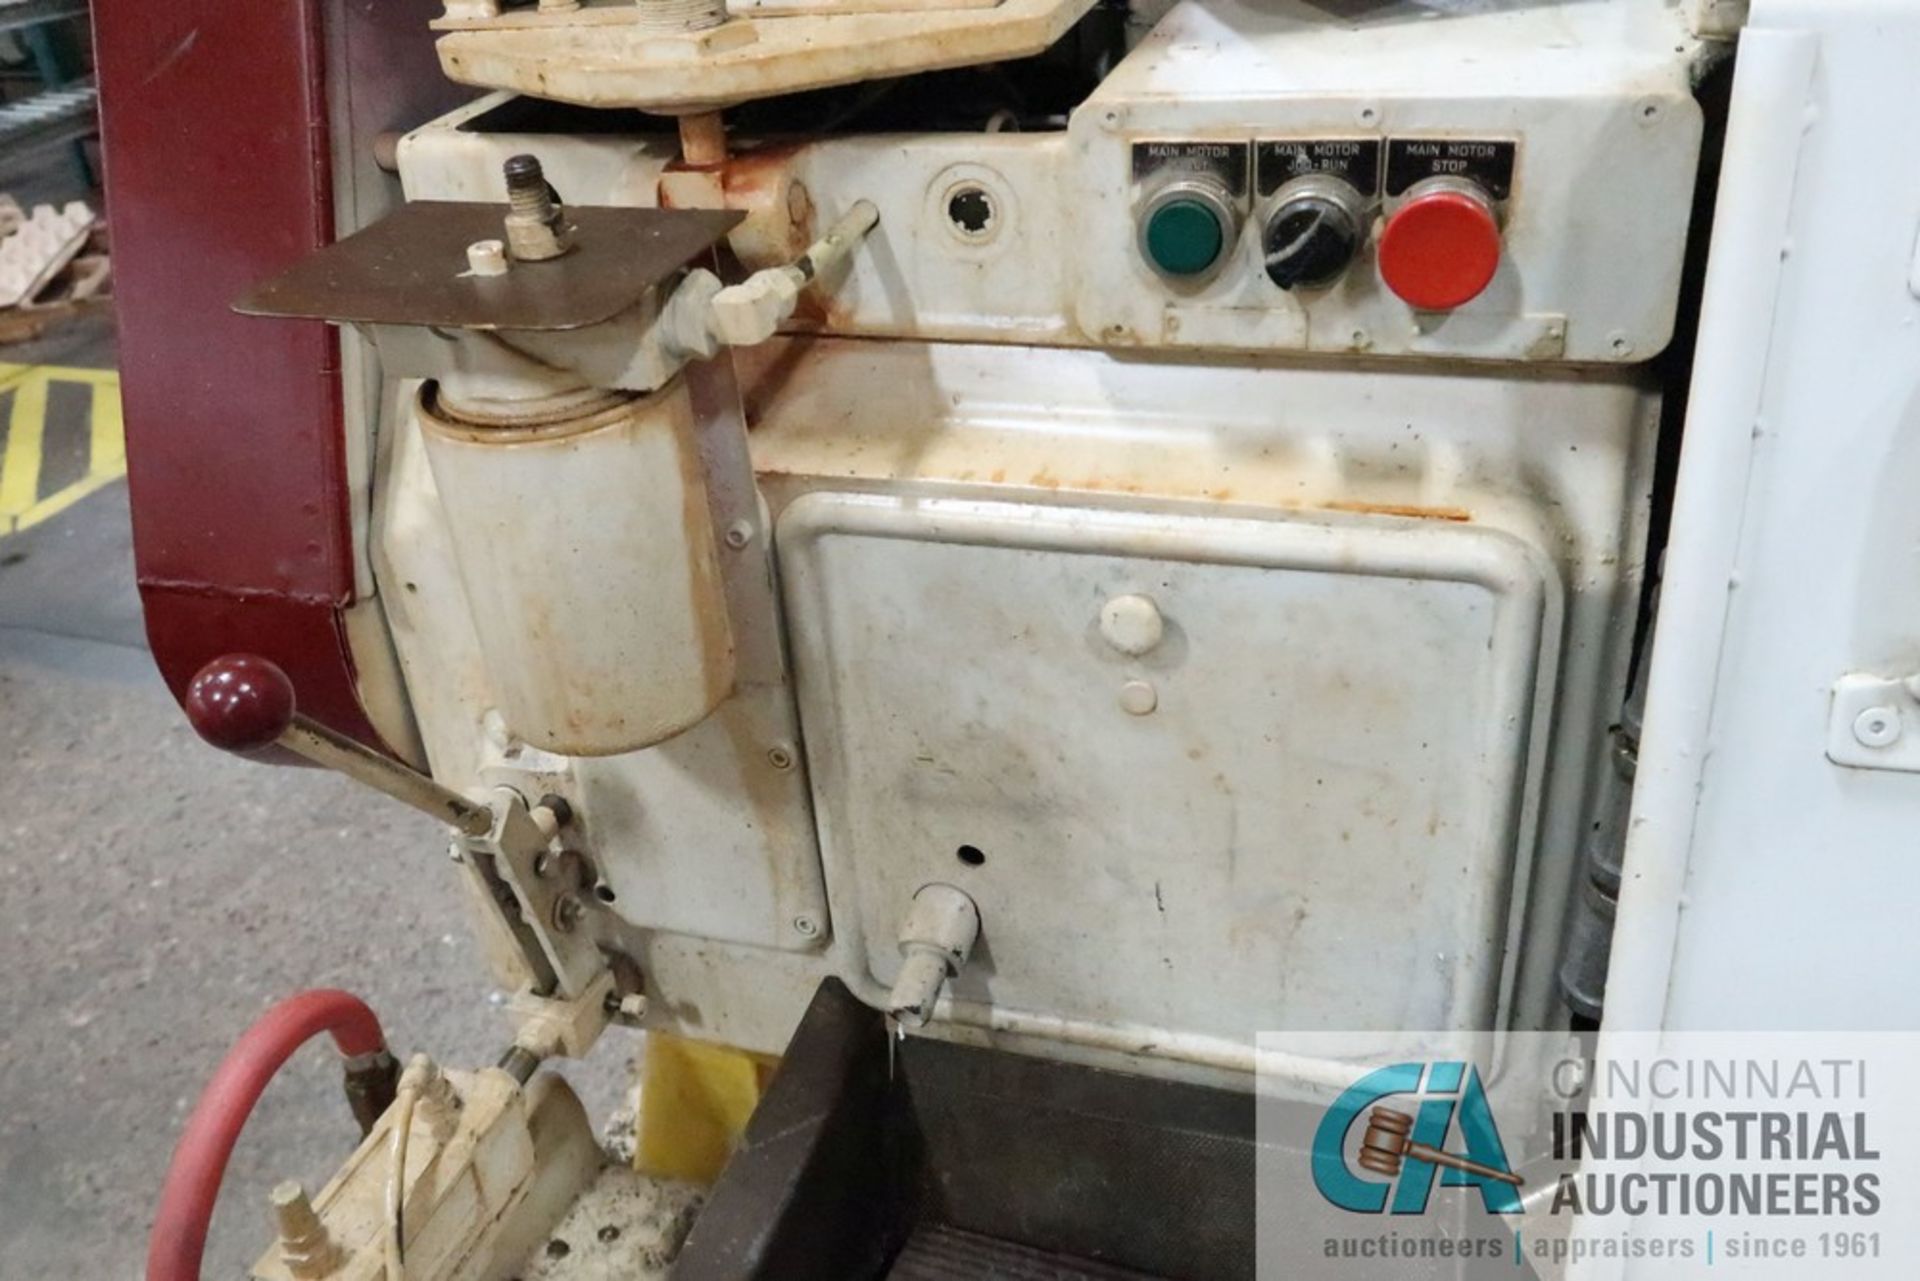 7/16 ACME-GRIDLEY MODEL RA-6 AUTOMATIC SCREW MACHINE; S/N C-18144, WITH AUTOMATIC BAR FEEDER - Image 10 of 12